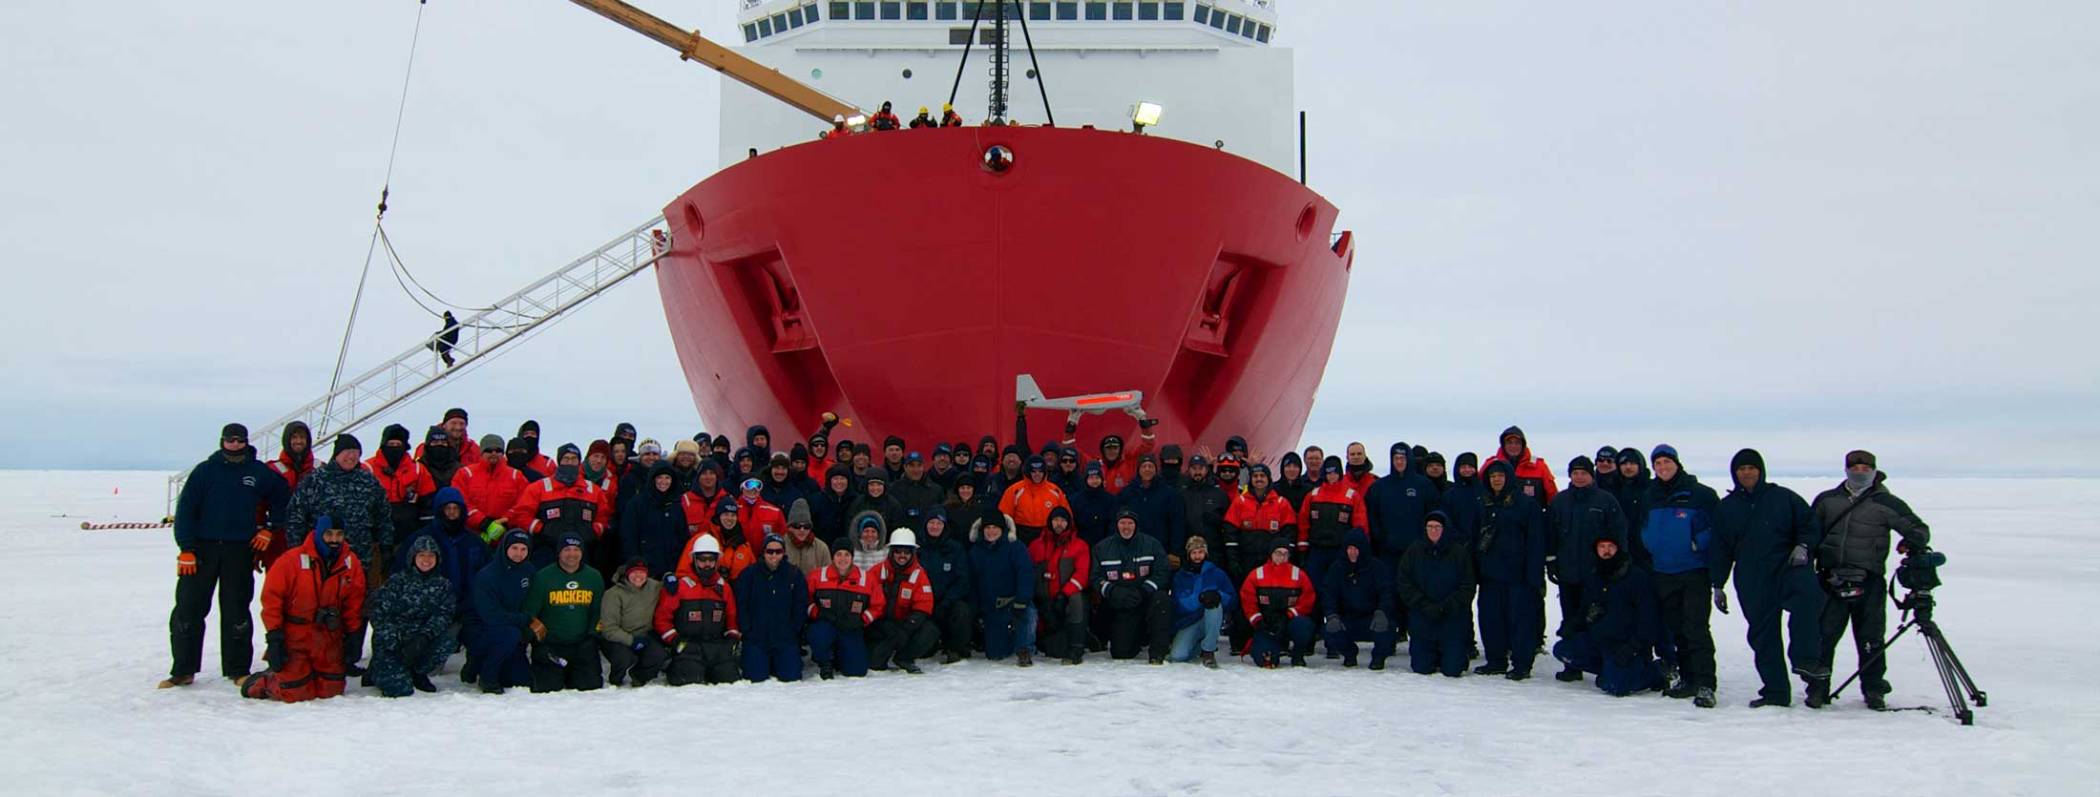 A group photo of people in winter gear standing on the ice in front the bow 1of a research vessel